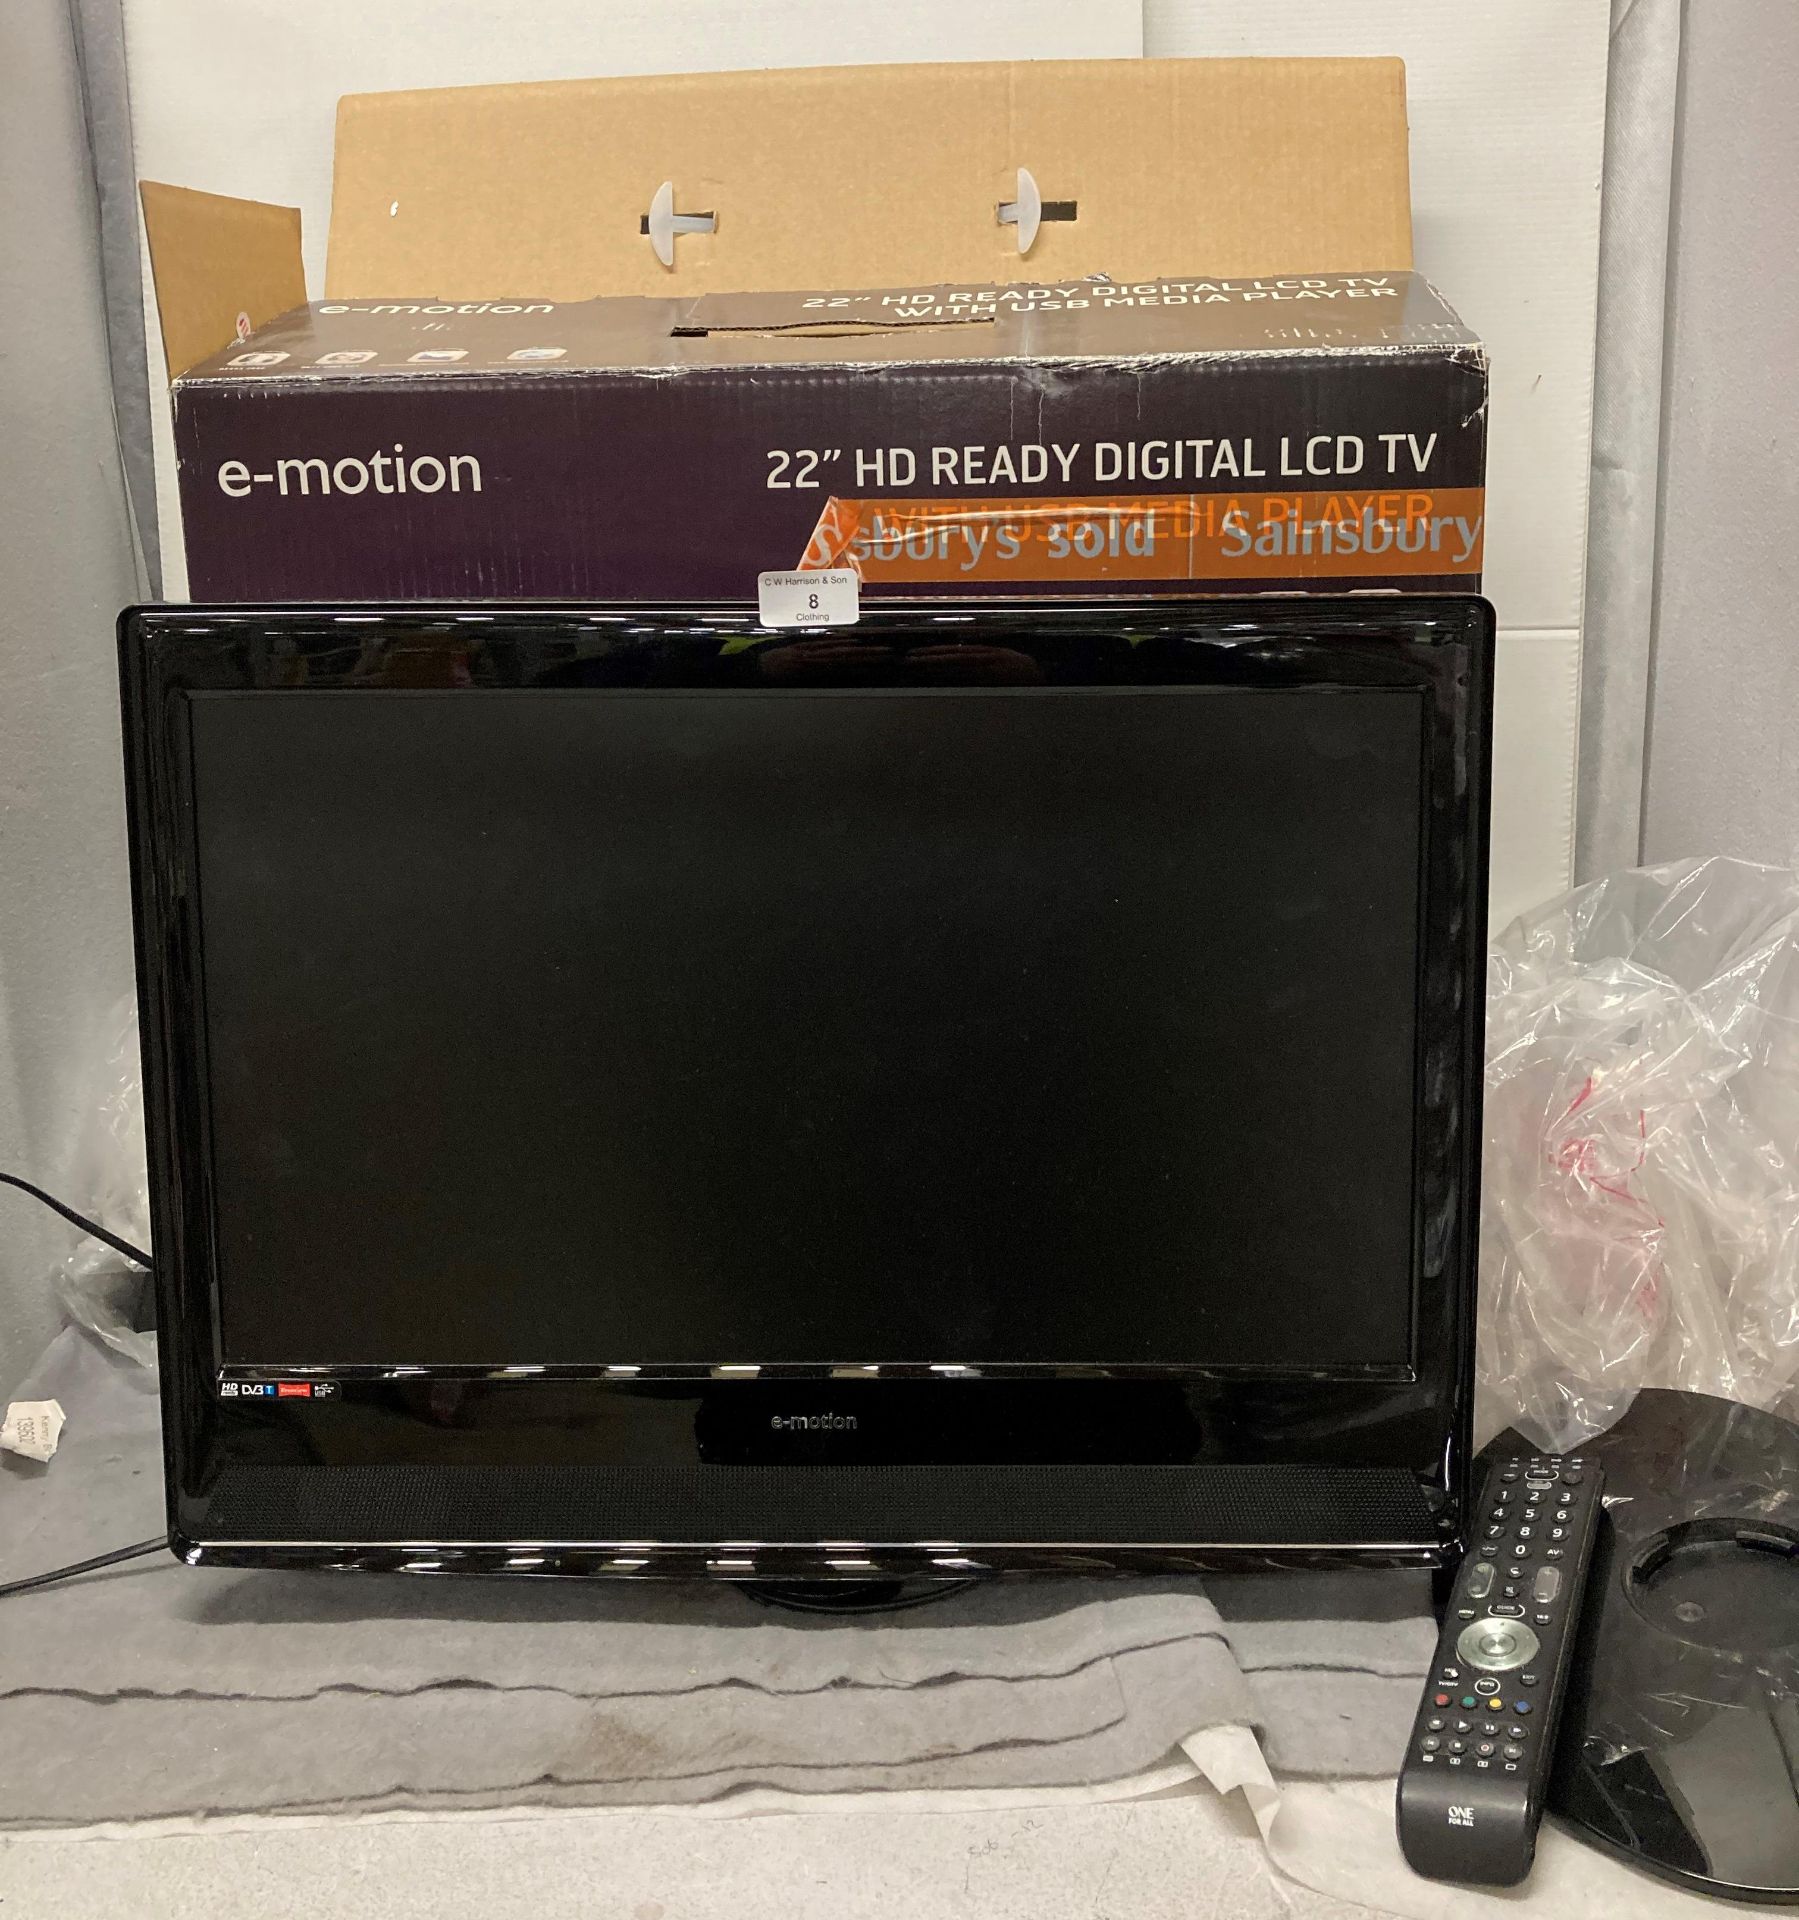 E-motion 22" HD ready digital LCD TV in box *Please note the final purchase price is subject to